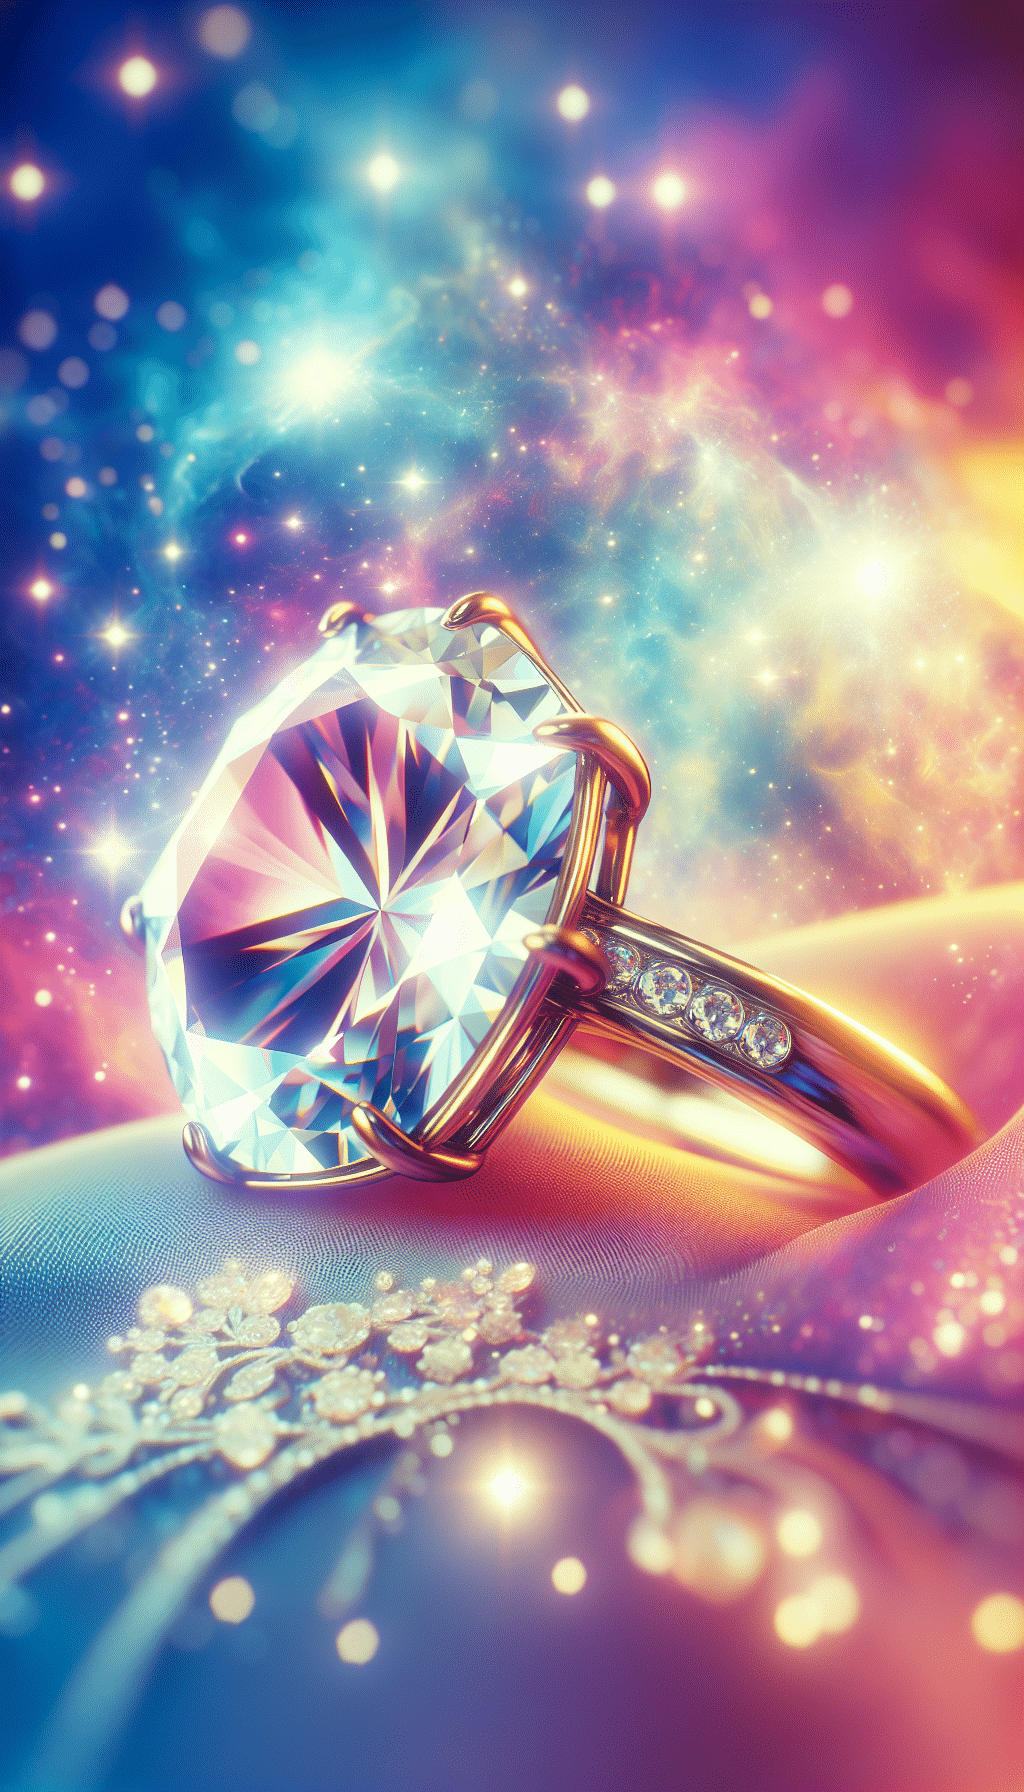 Diamond Ring Dreams: What They Mean